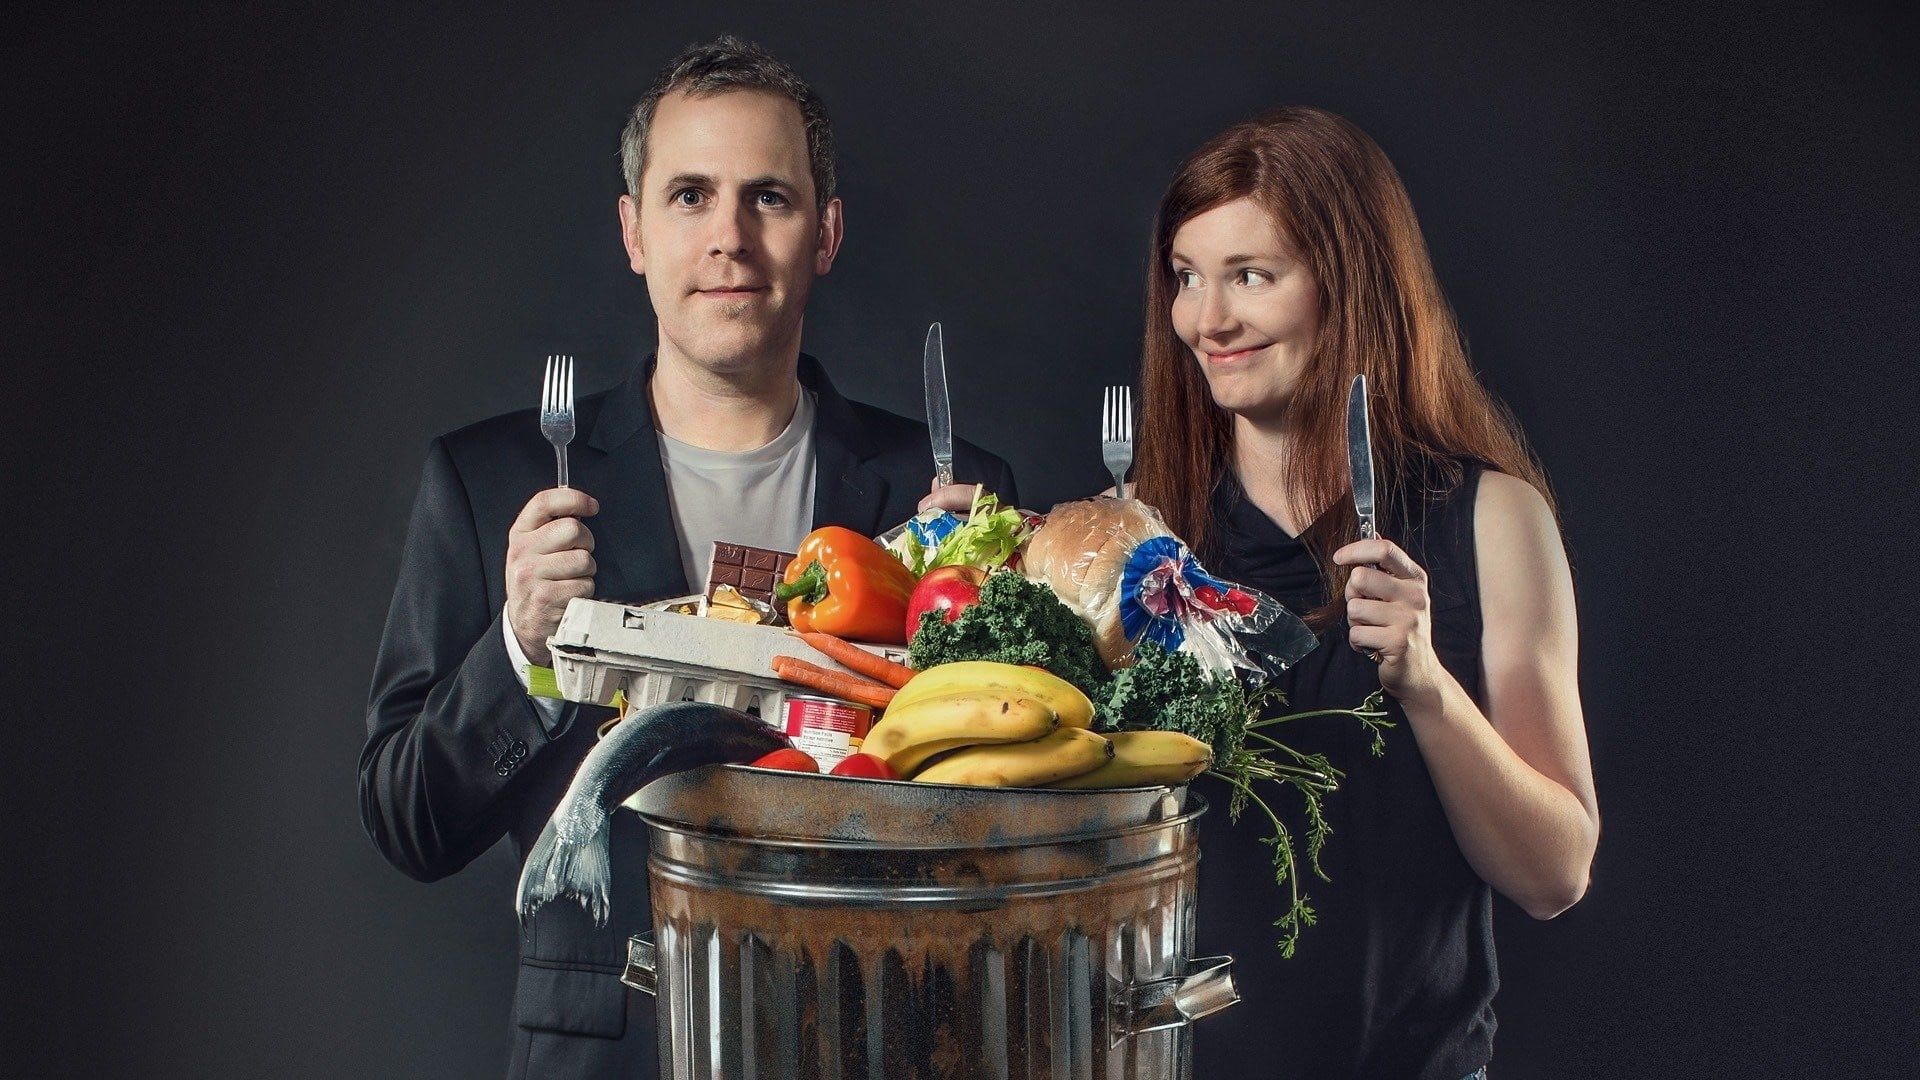 Just Eat It: A Food Waste Story background